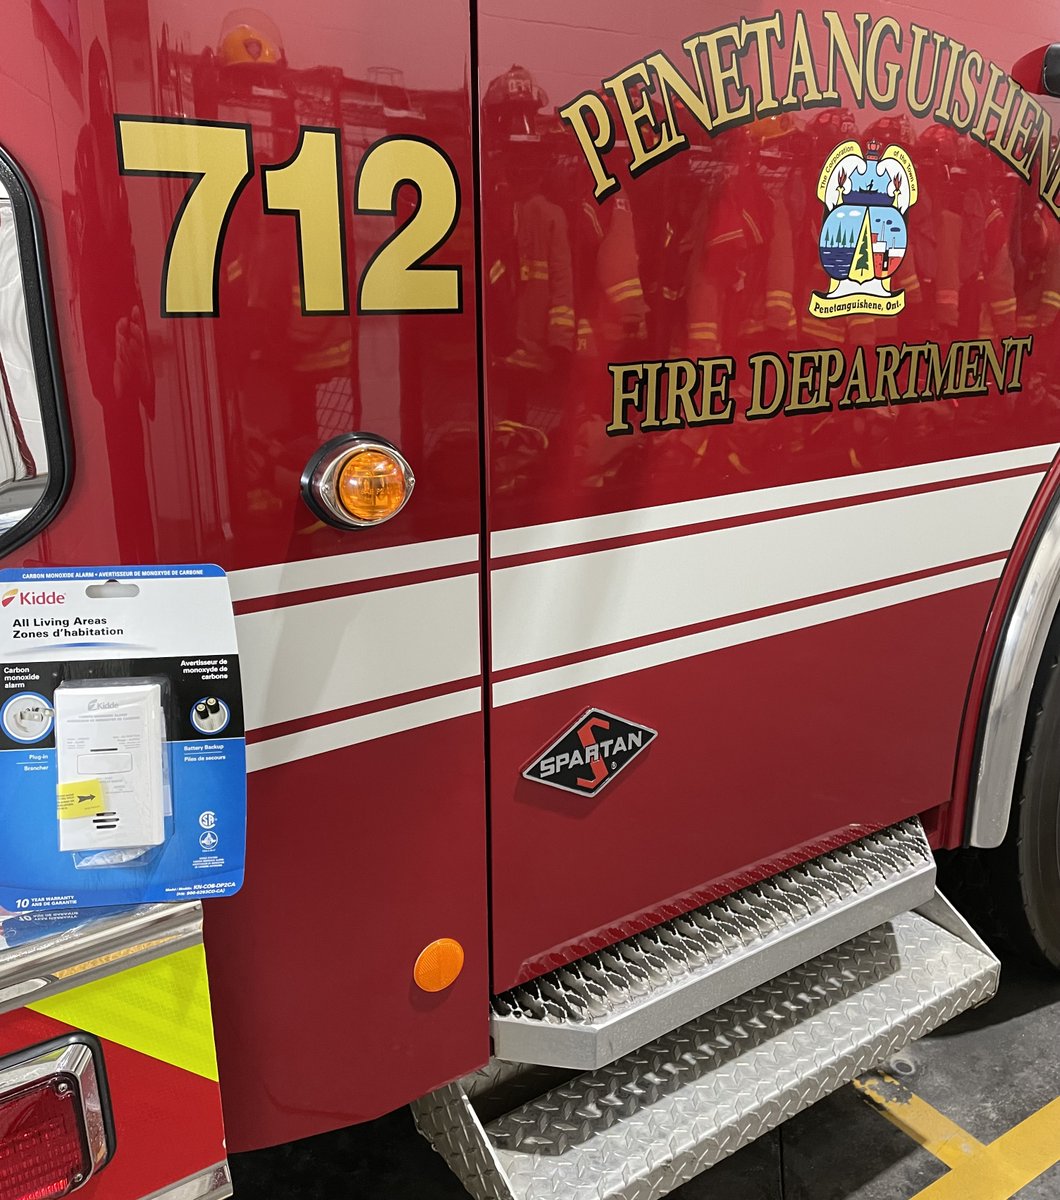 In the last two days PFD has responded to 2 separate calls for Carbon Monoxide alarm activations where high levels of CO was detected. These CO alarms potentially saved many lives! Make sure your home has a working CO alarm and test yours today!